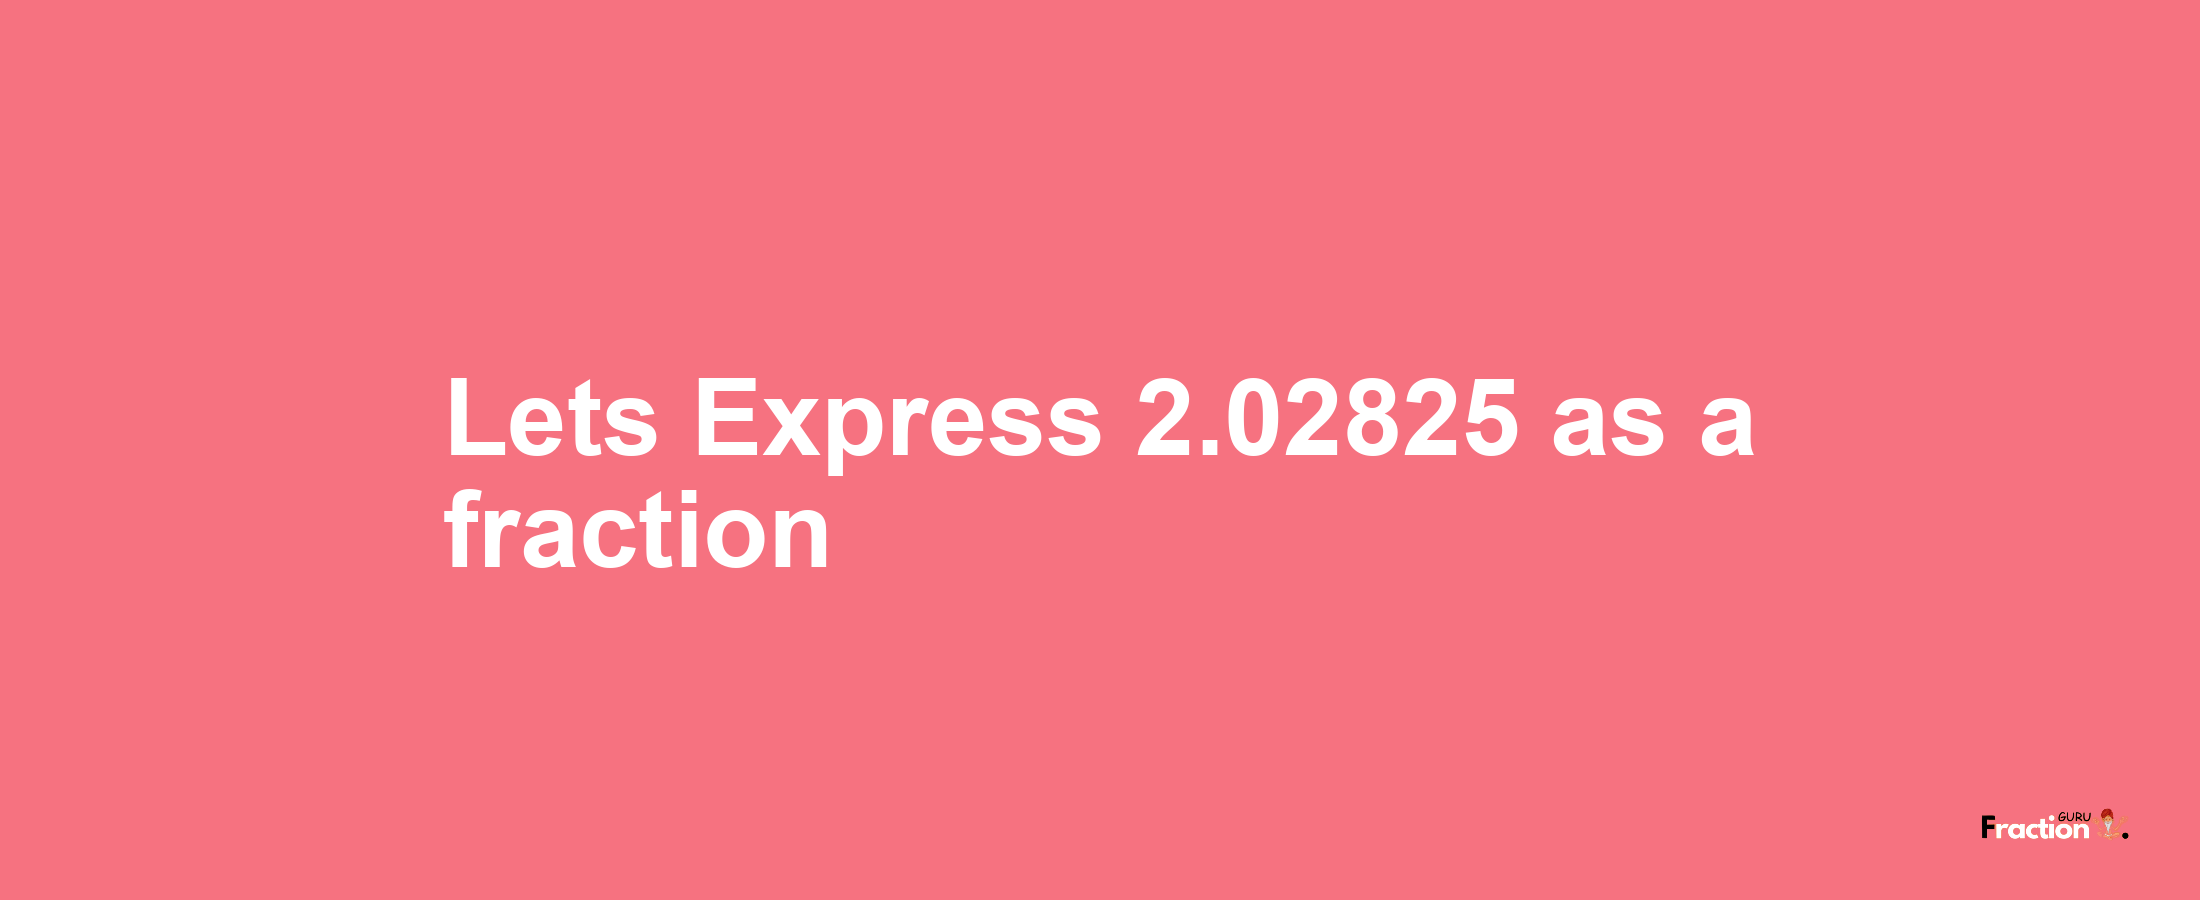 Lets Express 2.02825 as afraction